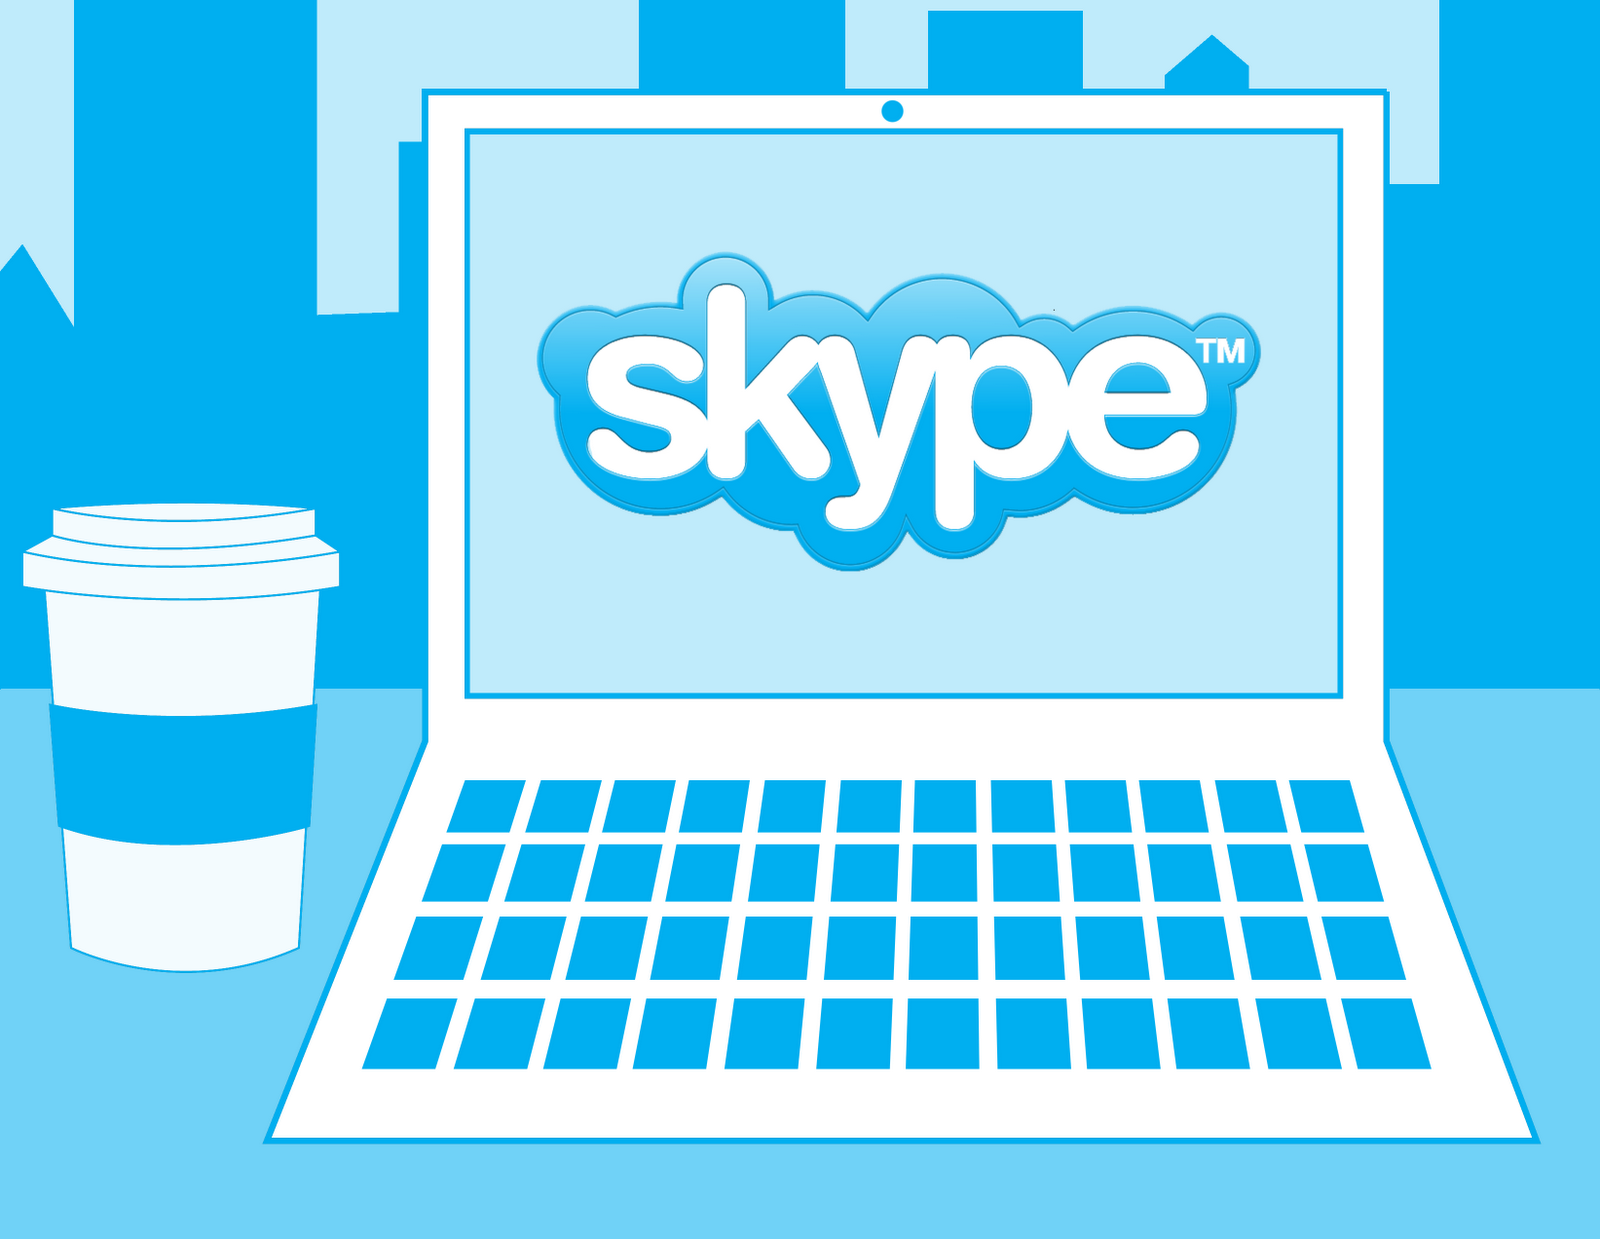 How to share your computer screen on Skype in 5 easy steps!